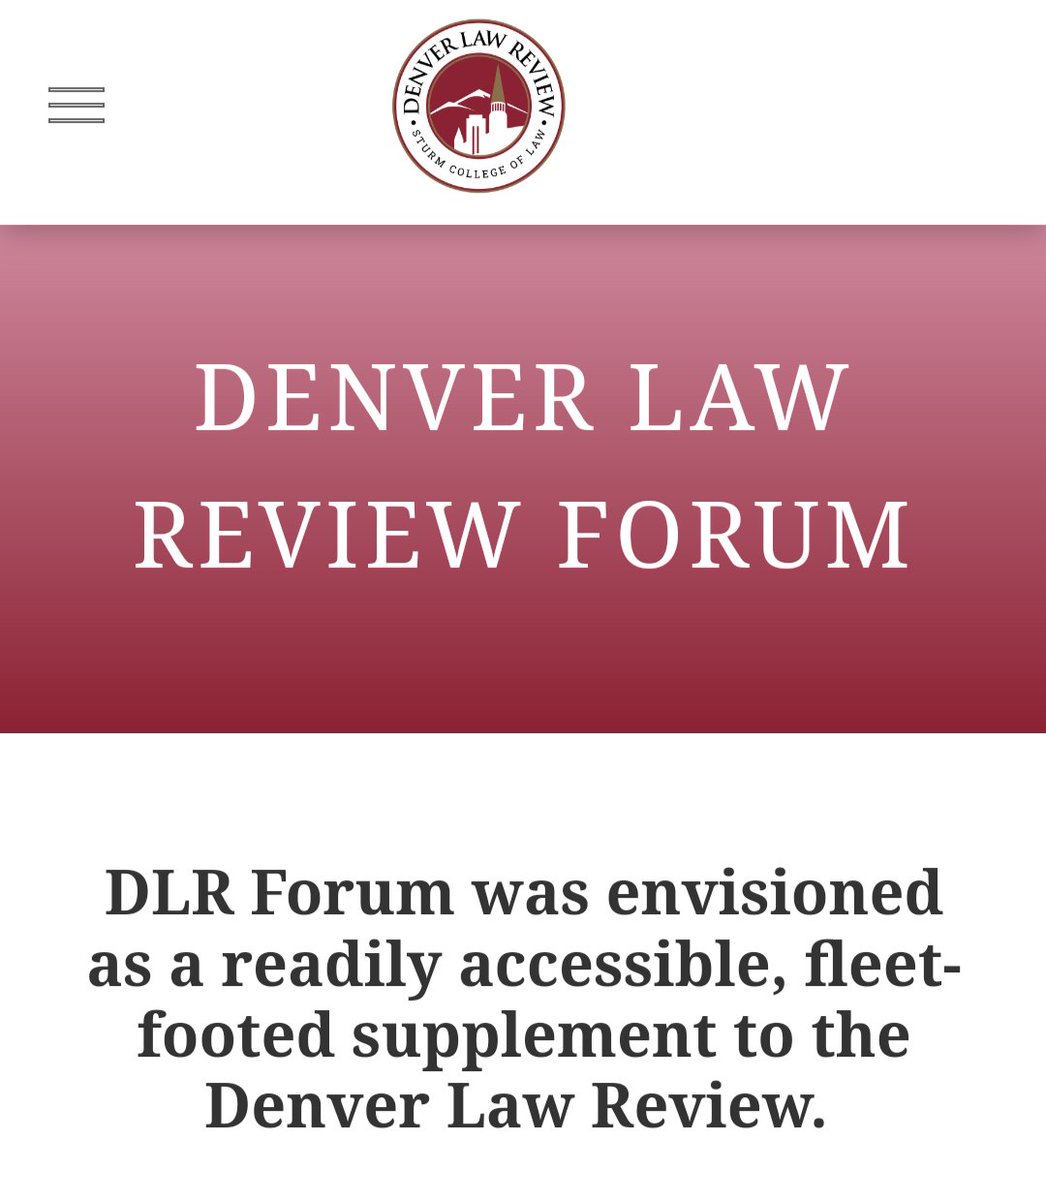 The DLR Forum, the online supplement to DLR's print journal, is now accepting submissions, which can be made online through Scholastica or by submitting your manuscript and CV to Senior Forum Editor Adam Estacio at aestacio23@law.du.edu. denverlawreview.org/dlr-forum to learn more